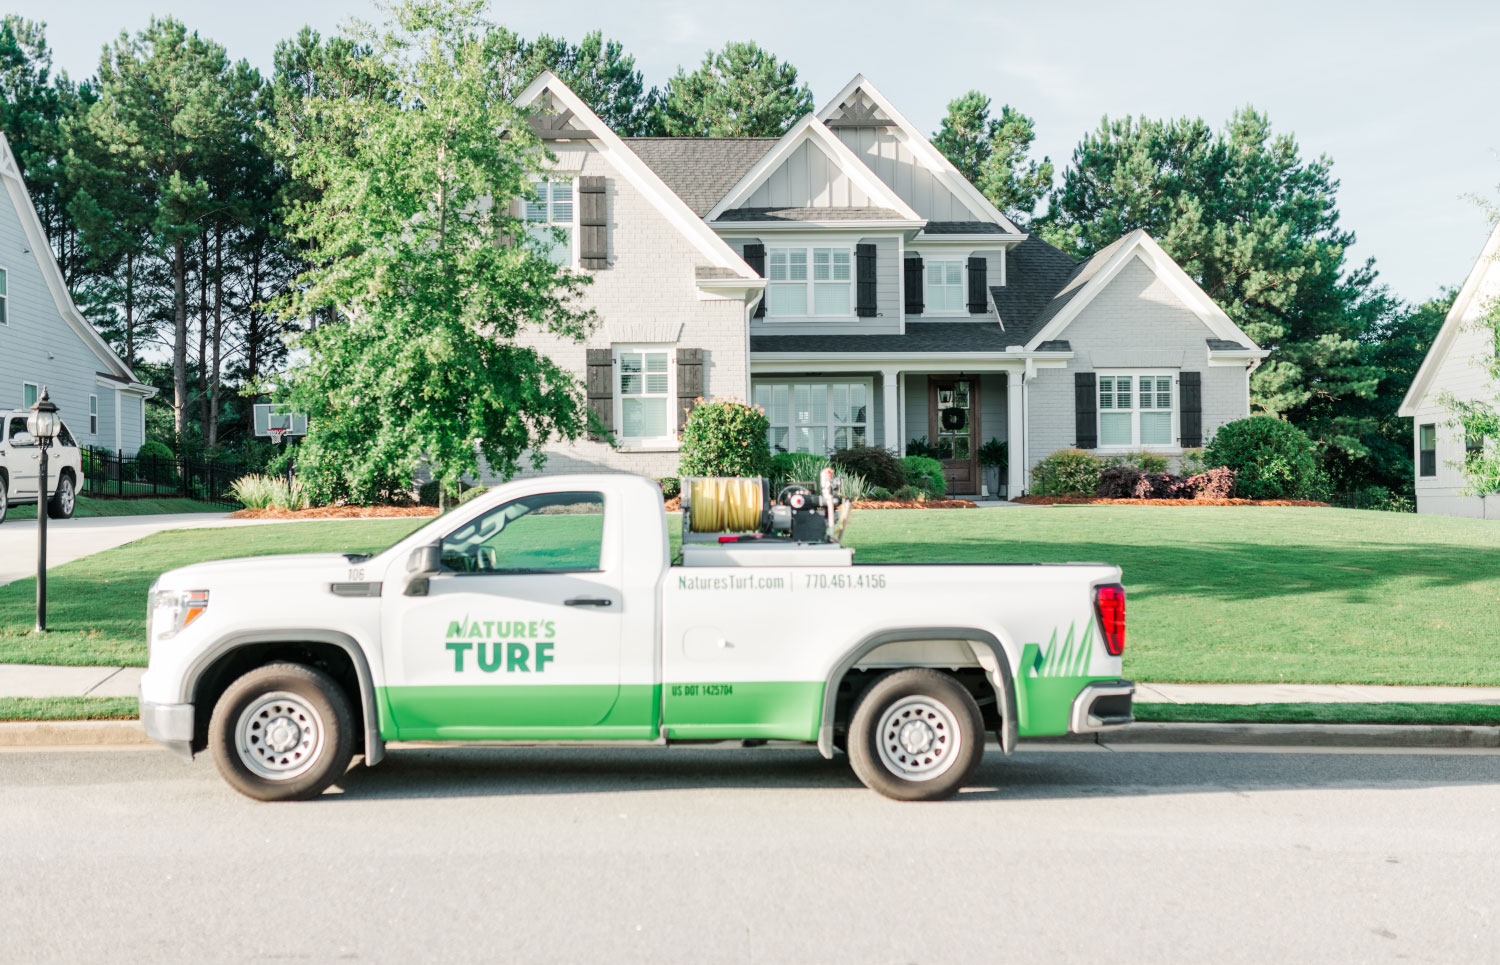 Nature’s Turf: Proven Lawn Care Services and Pest Control